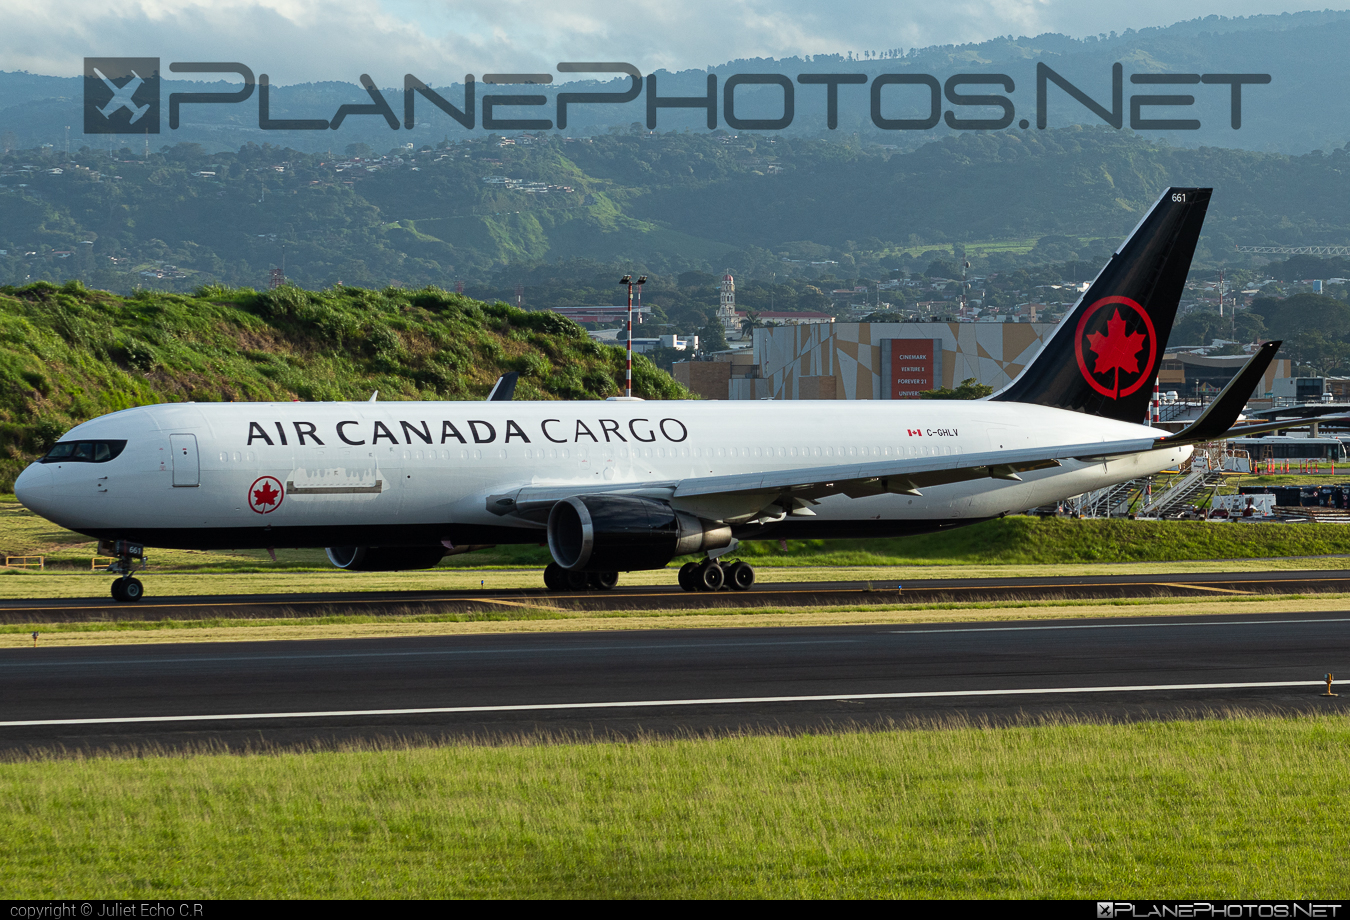 Boeing 767-300BDSF - C-GHLV operated by Air Canada Cargo #airCanada #airCanadaCargo #b767 #b767300bdsf #b767bdsf #bedekspecialfreighter #boeing #boeing767